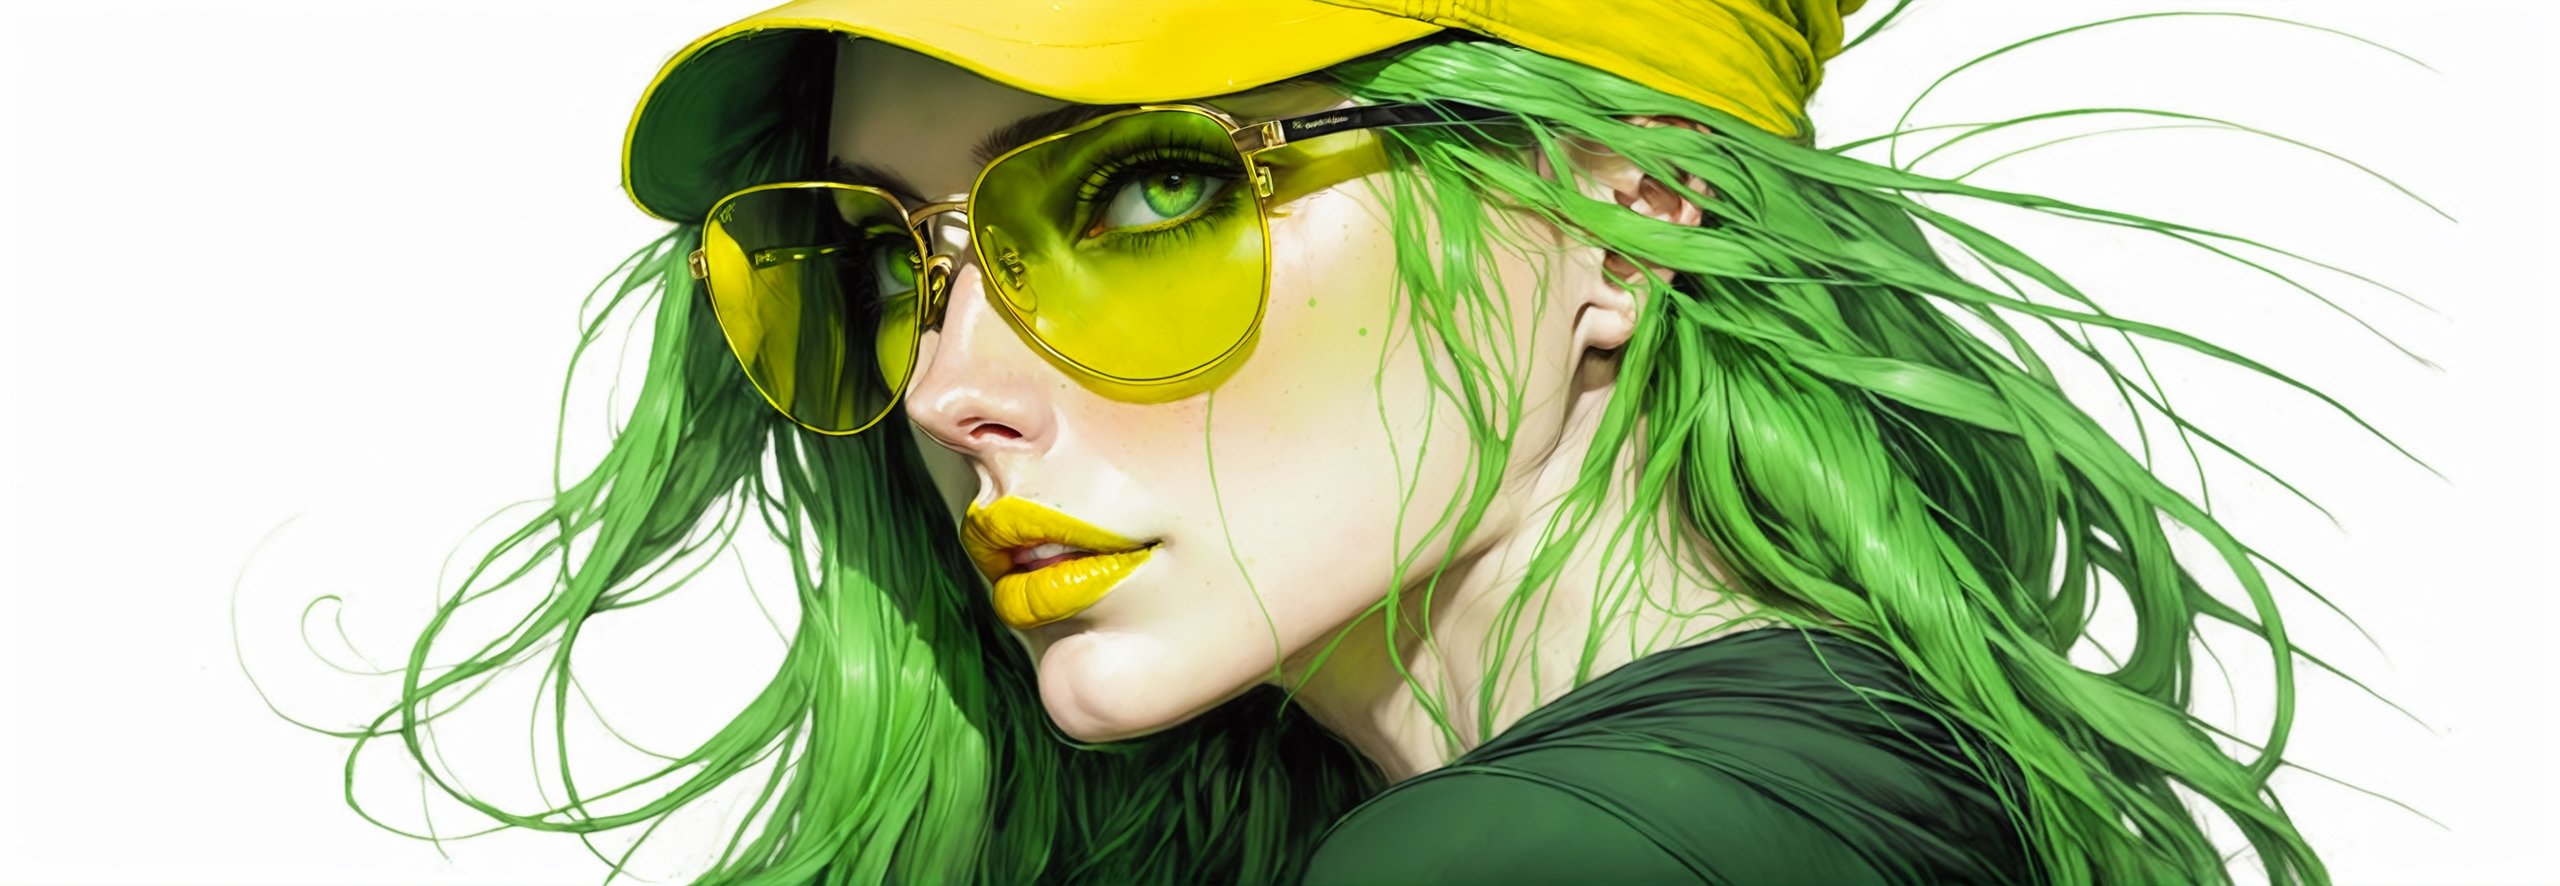 pencil Sketch of a beautiful  athletic woman 30 years old, , green long hair, yellow shades, cap, ((skull on her cap)), disheveled alluring, ((full body)), portrait by Charles Miano, ink drawing, illustrative art, soft lighting, detailed, more Flowing rhythm, elegant, low contrast, add soft blur with thin line, full red lips, green eyes, black clothes.